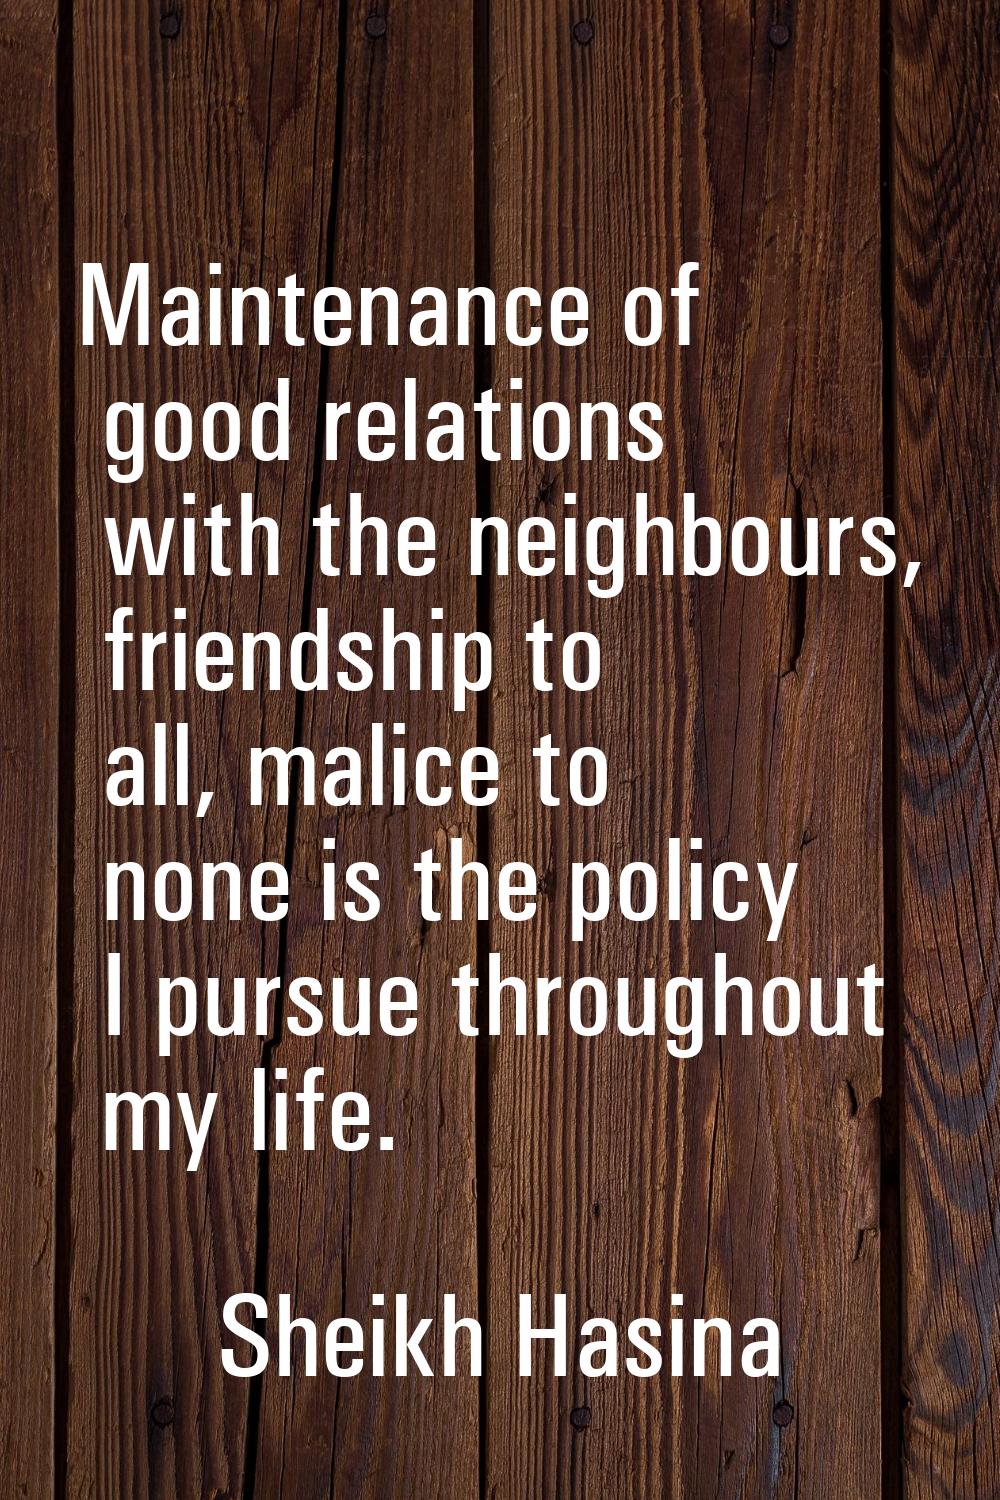 Maintenance of good relations with the neighbours, friendship to all, malice to none is the policy 